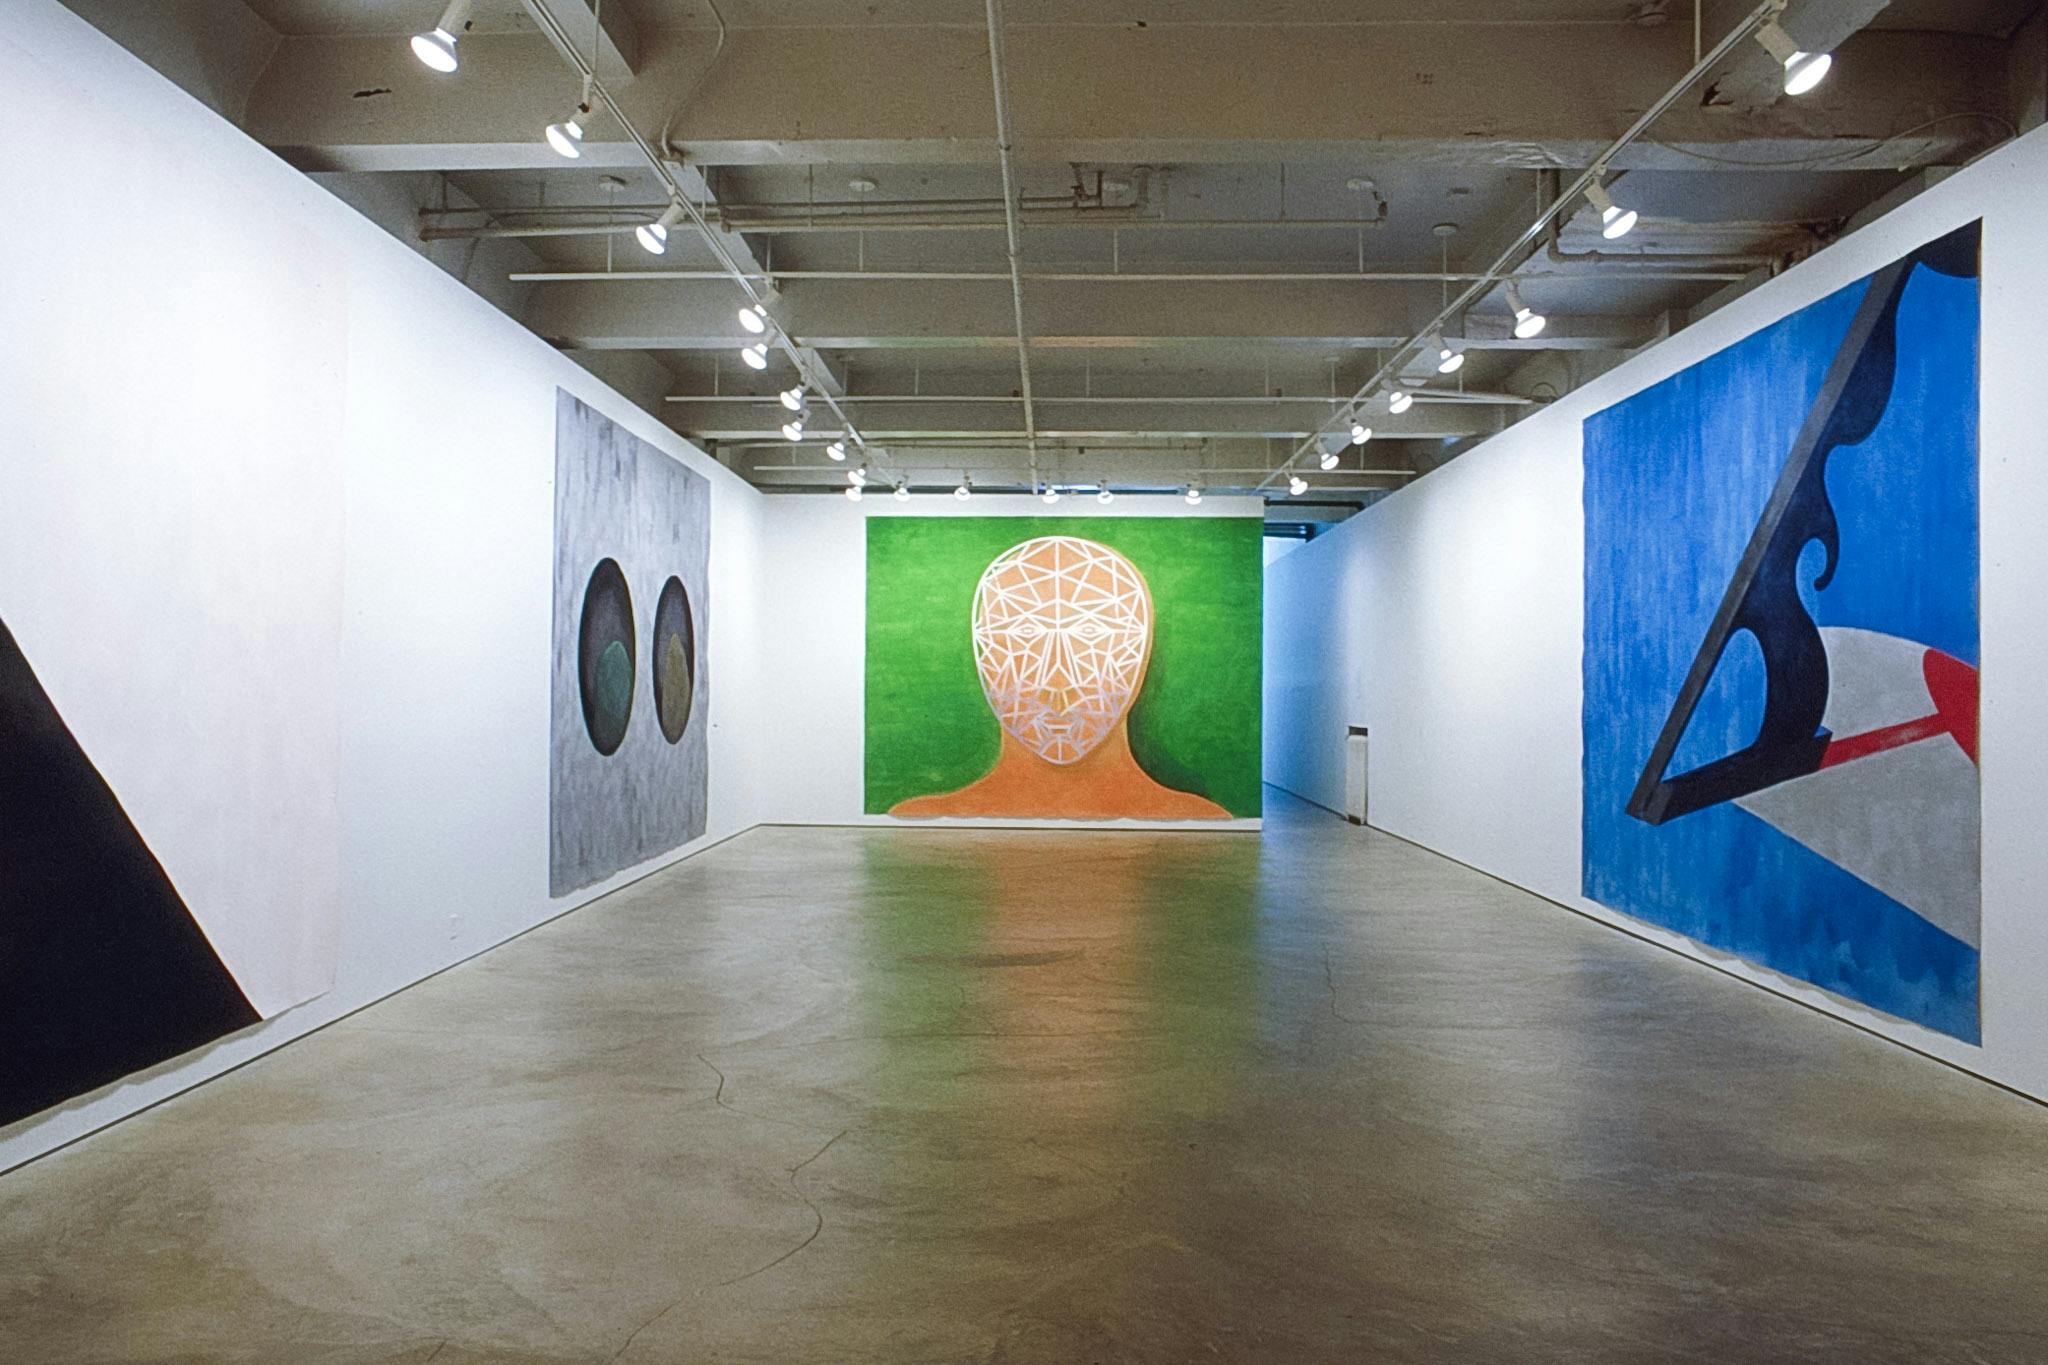 Four paintings are installed on the gallery walls. Two of them mainly depict geometric and organic shapes and lines. The one in the middle depicts a human face in the green background. 